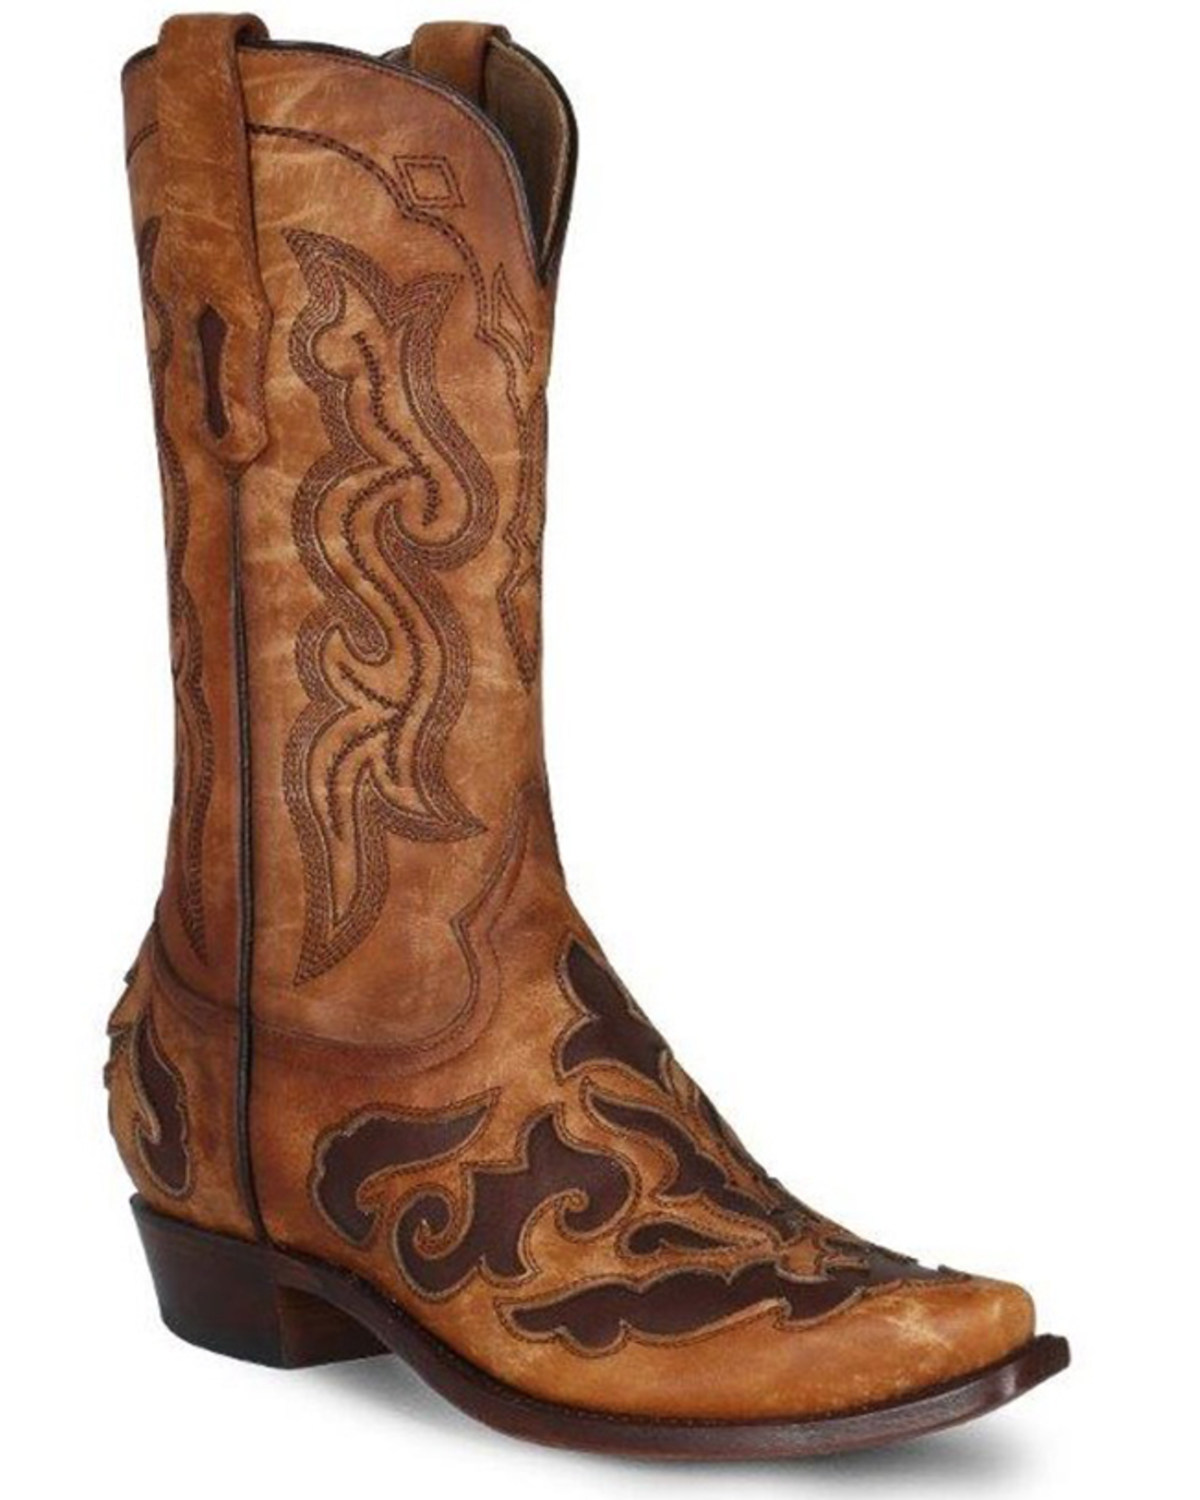 Corral Men's Inaly Western Boots - Snip Toe